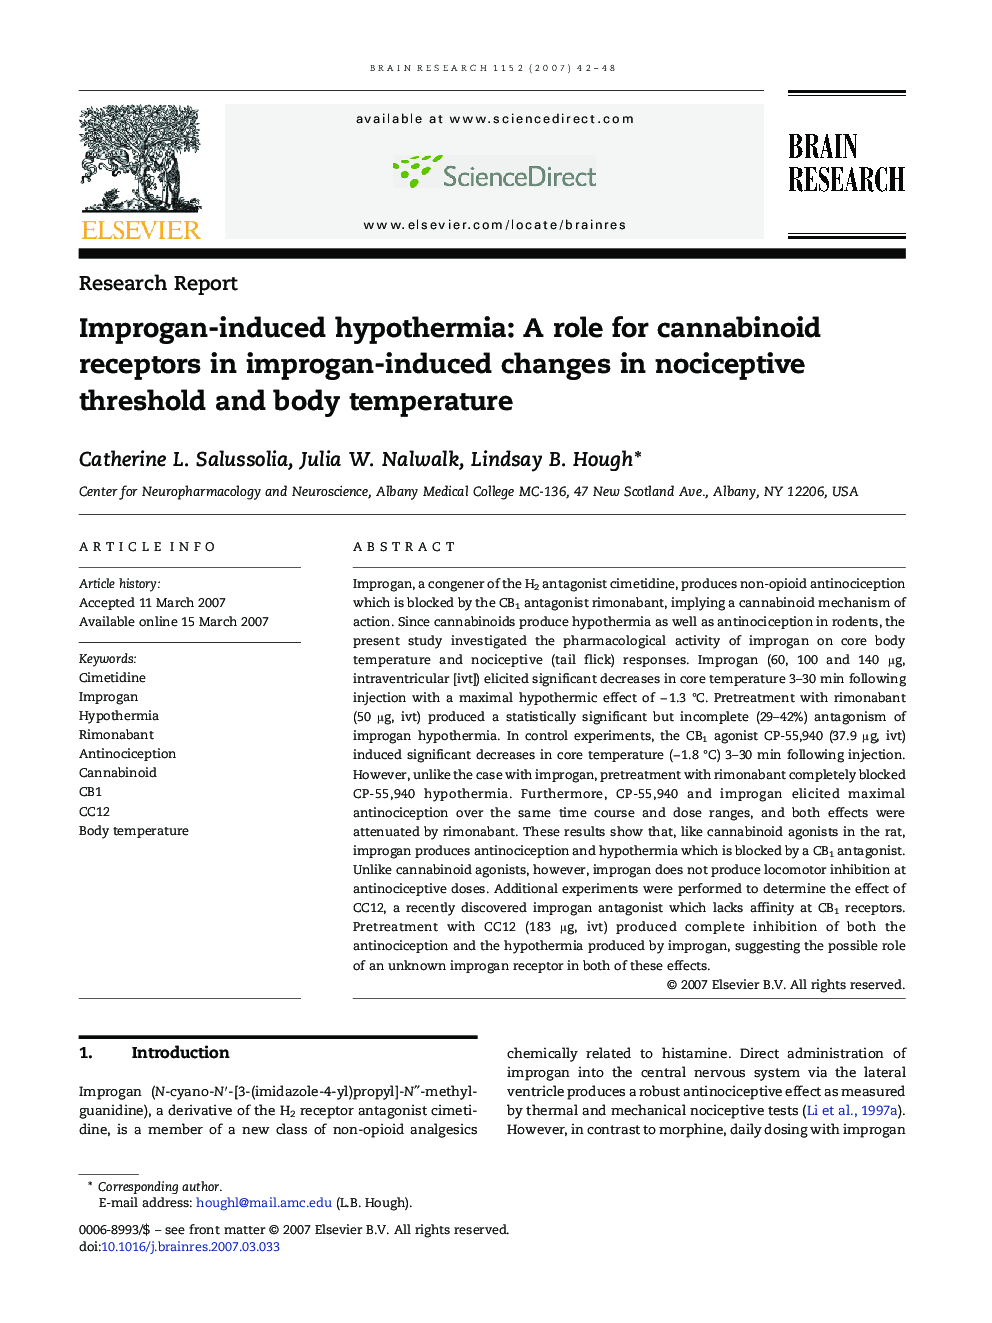 Improgan-induced hypothermia: A role for cannabinoid receptors in improgan-induced changes in nociceptive threshold and body temperature